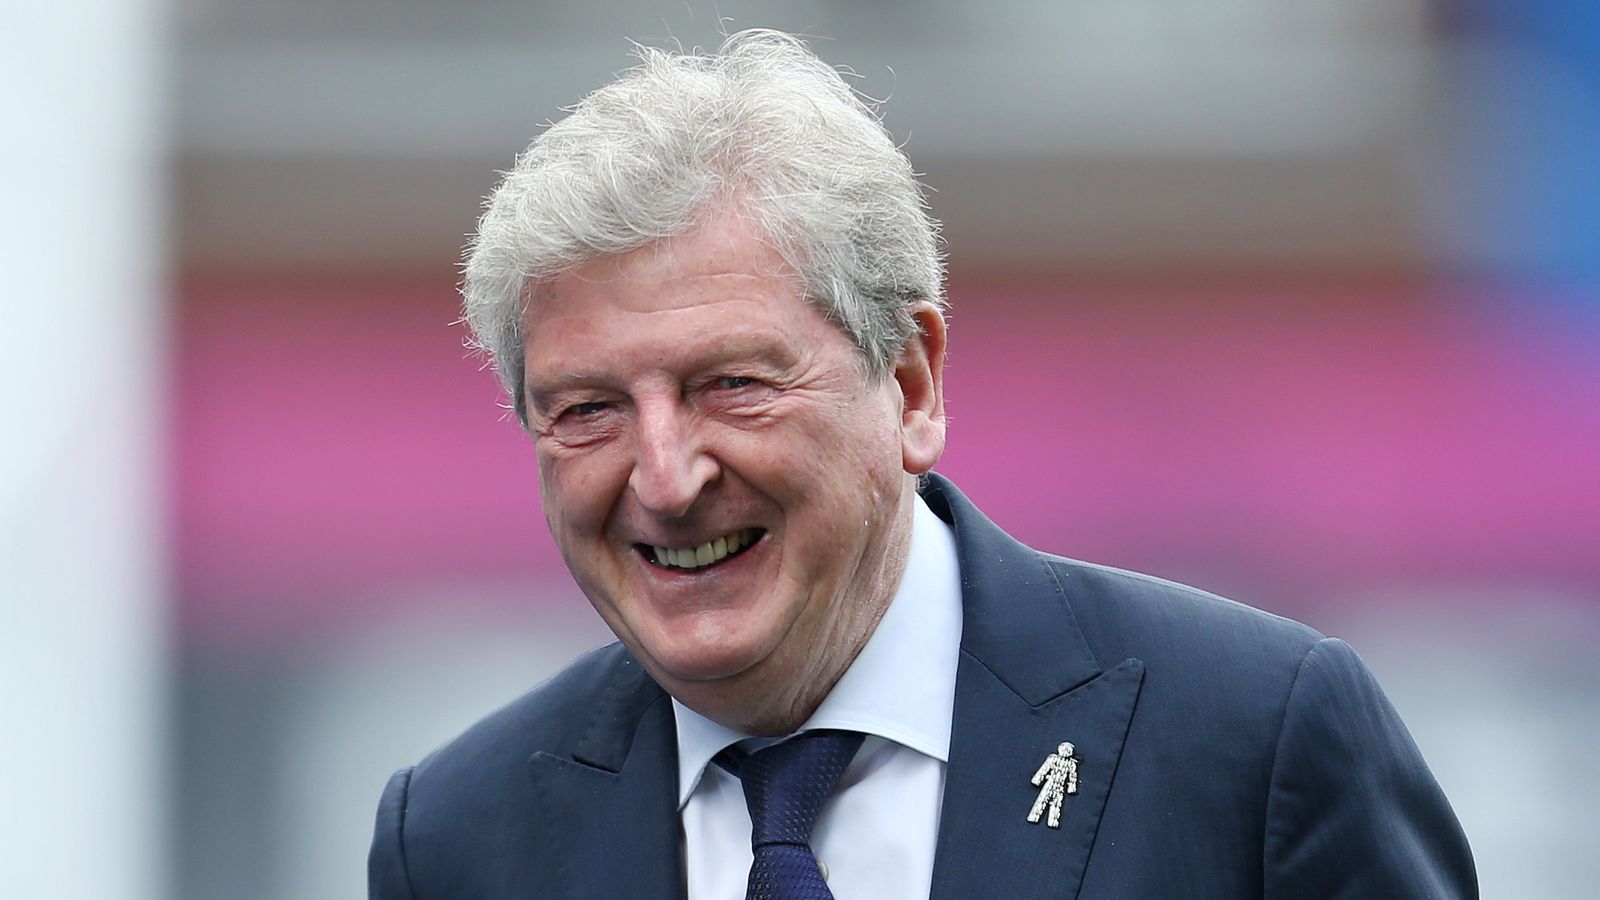 Roy Hodgson: Watford set to appoint former England boss as head coach following ..